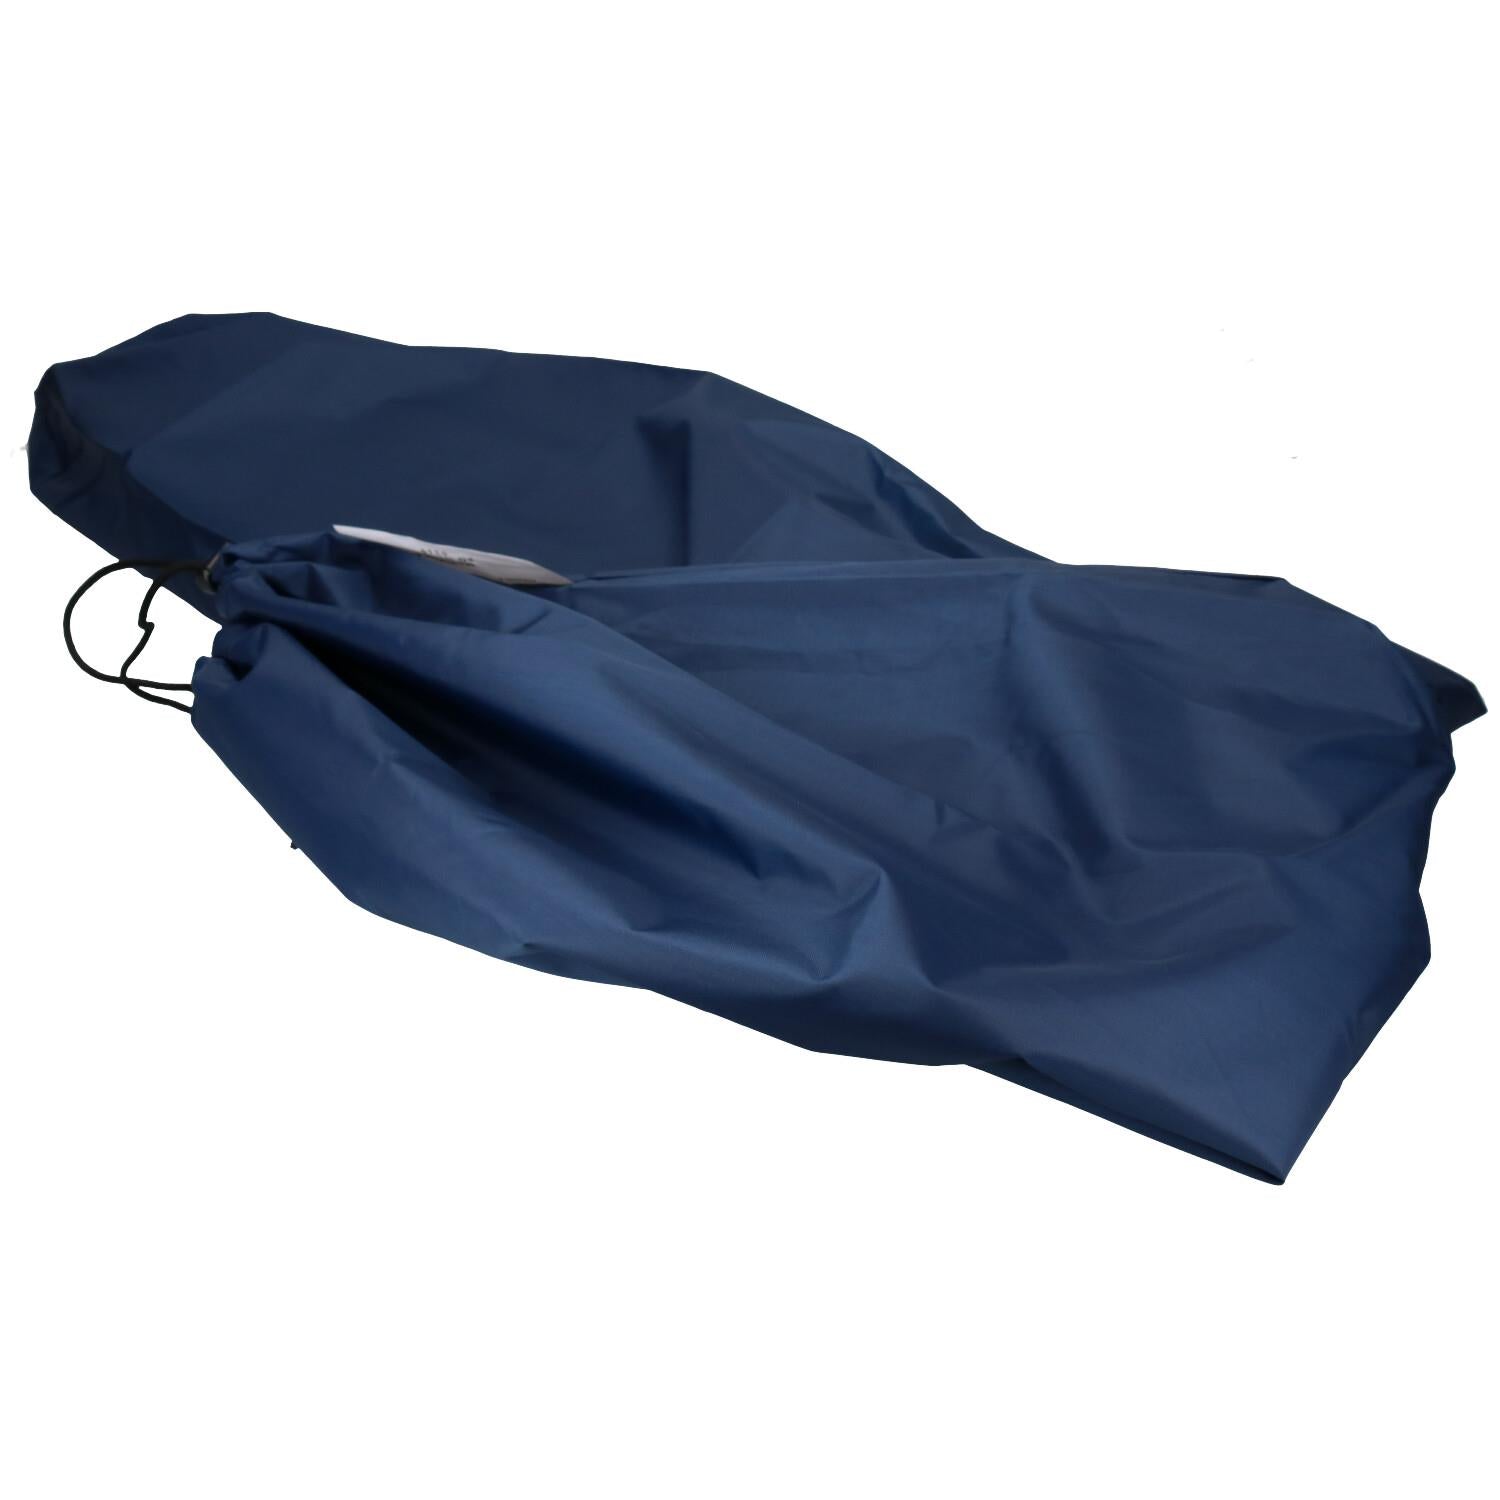 Large Tent Awning Pole Canvas Storage Bag Drawstring 150cm by 40cm